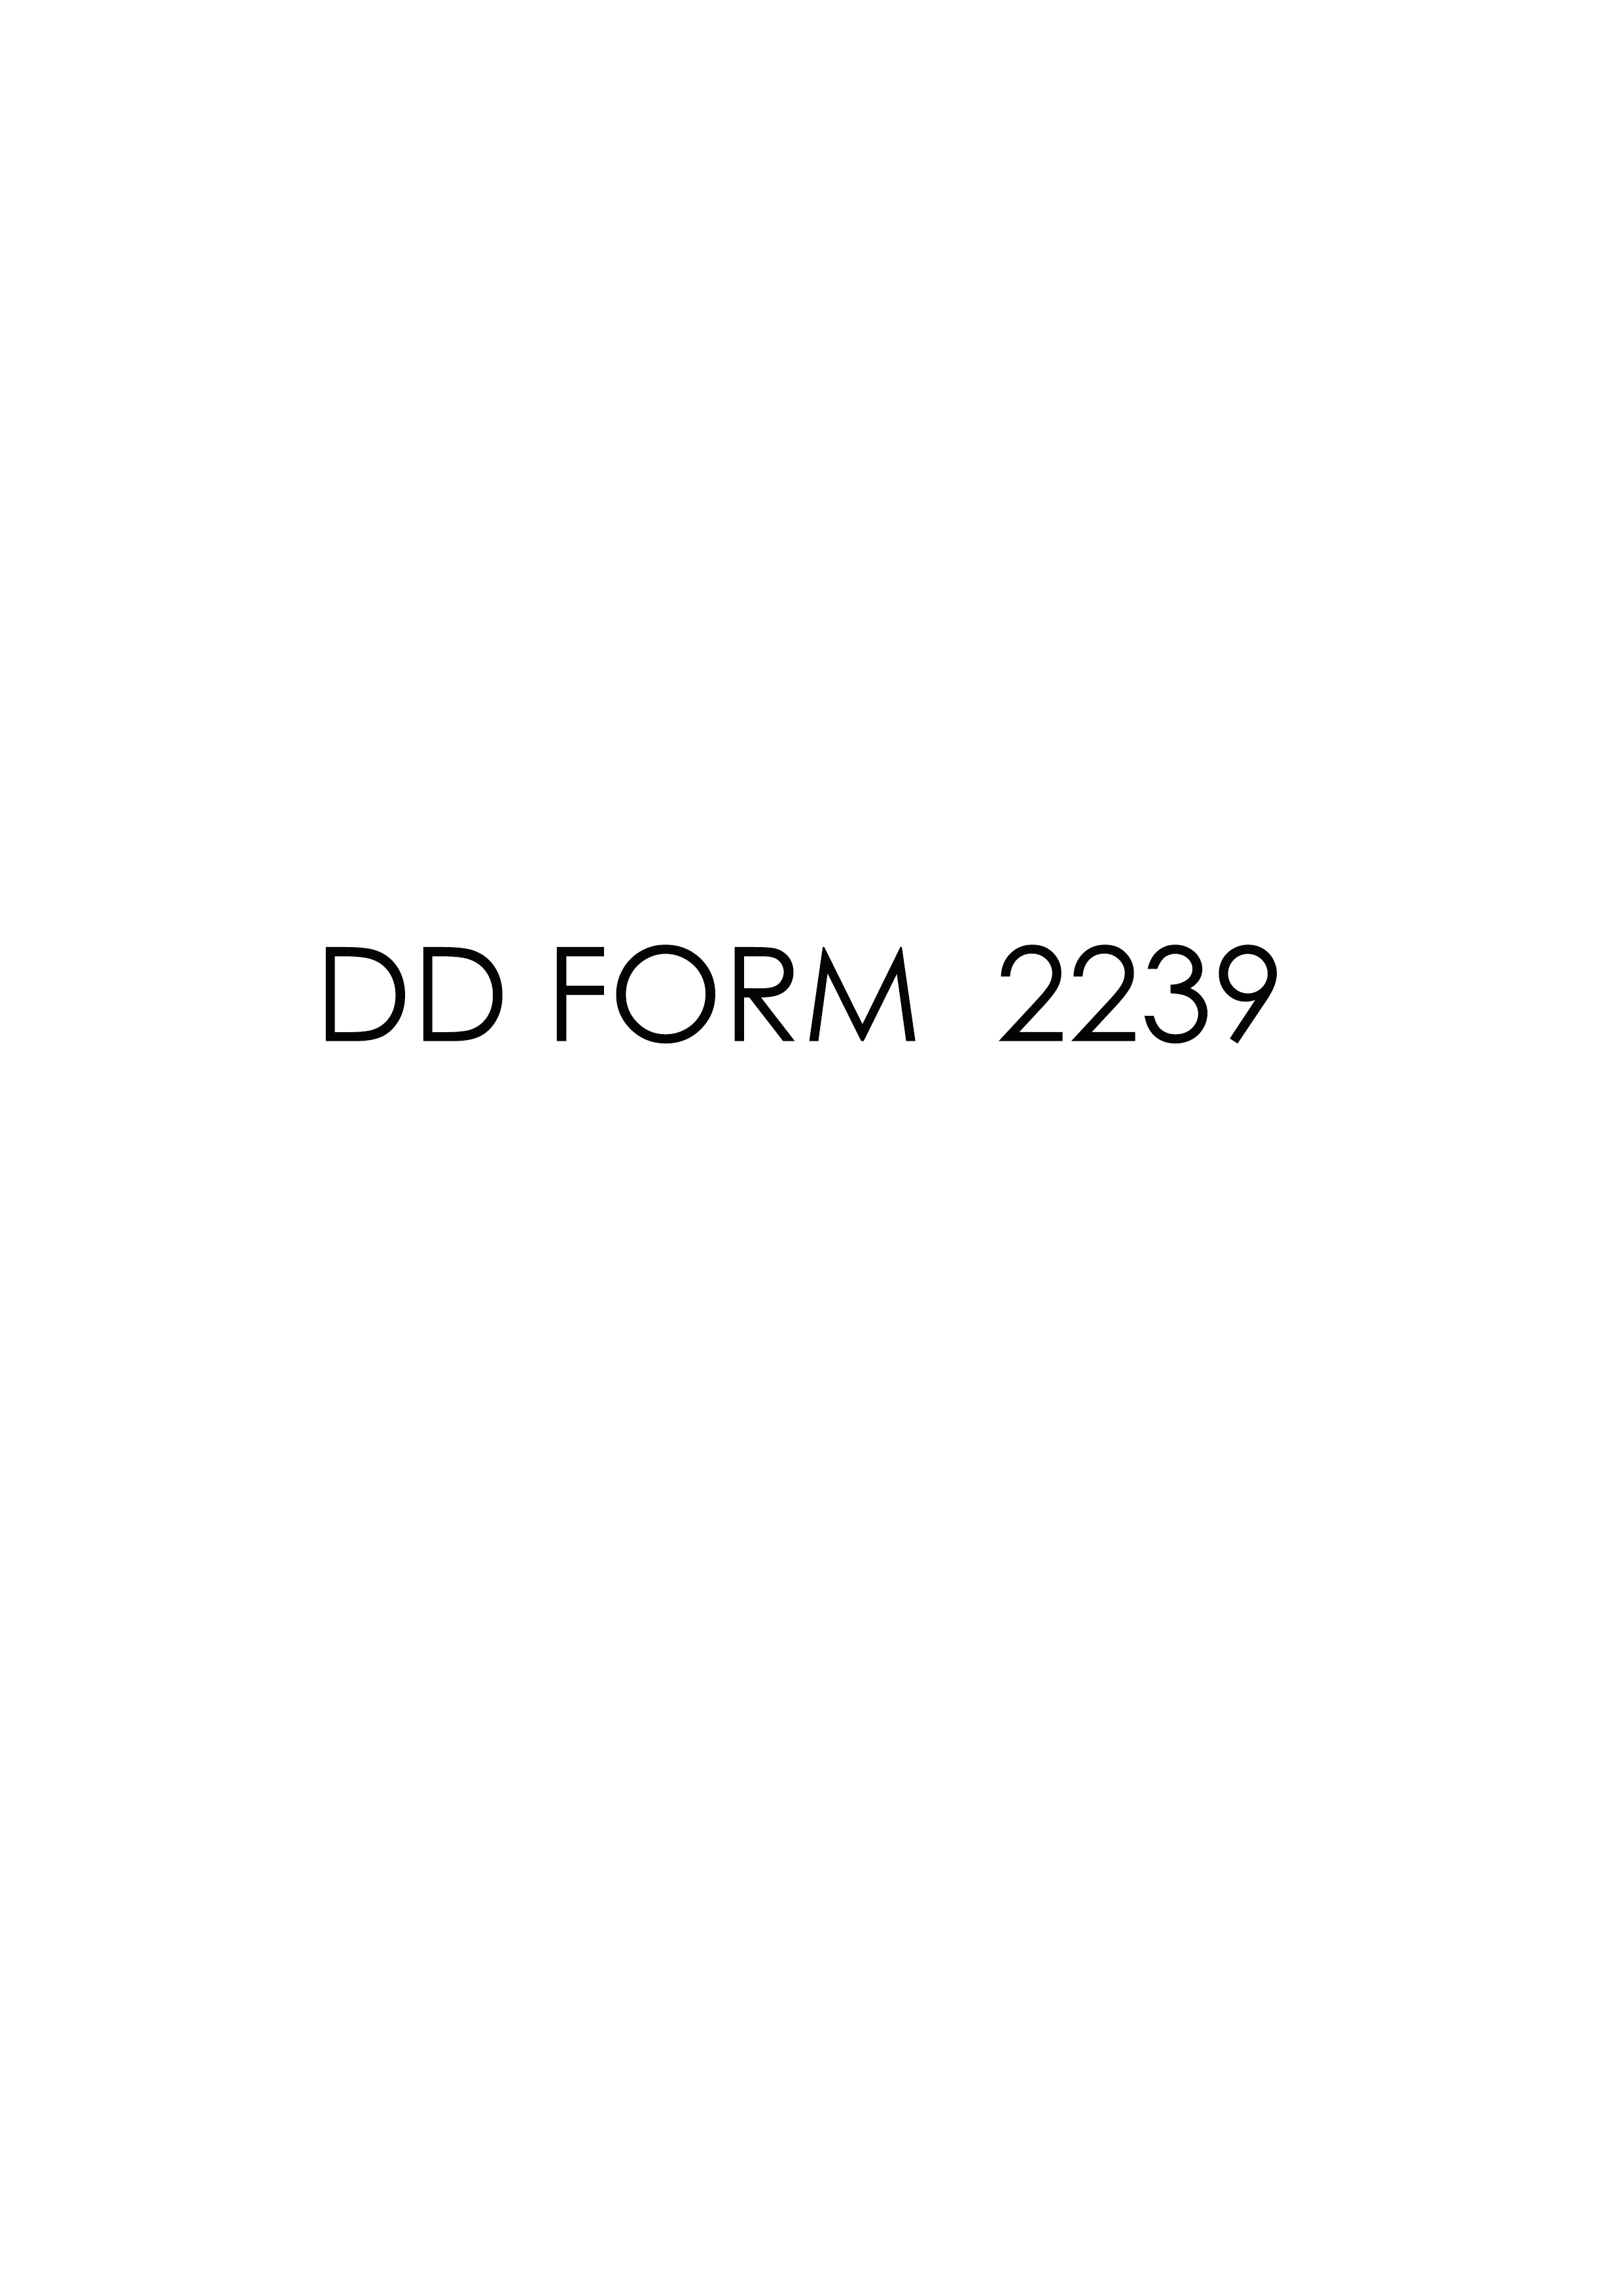 Download Fillable dd Form 2239